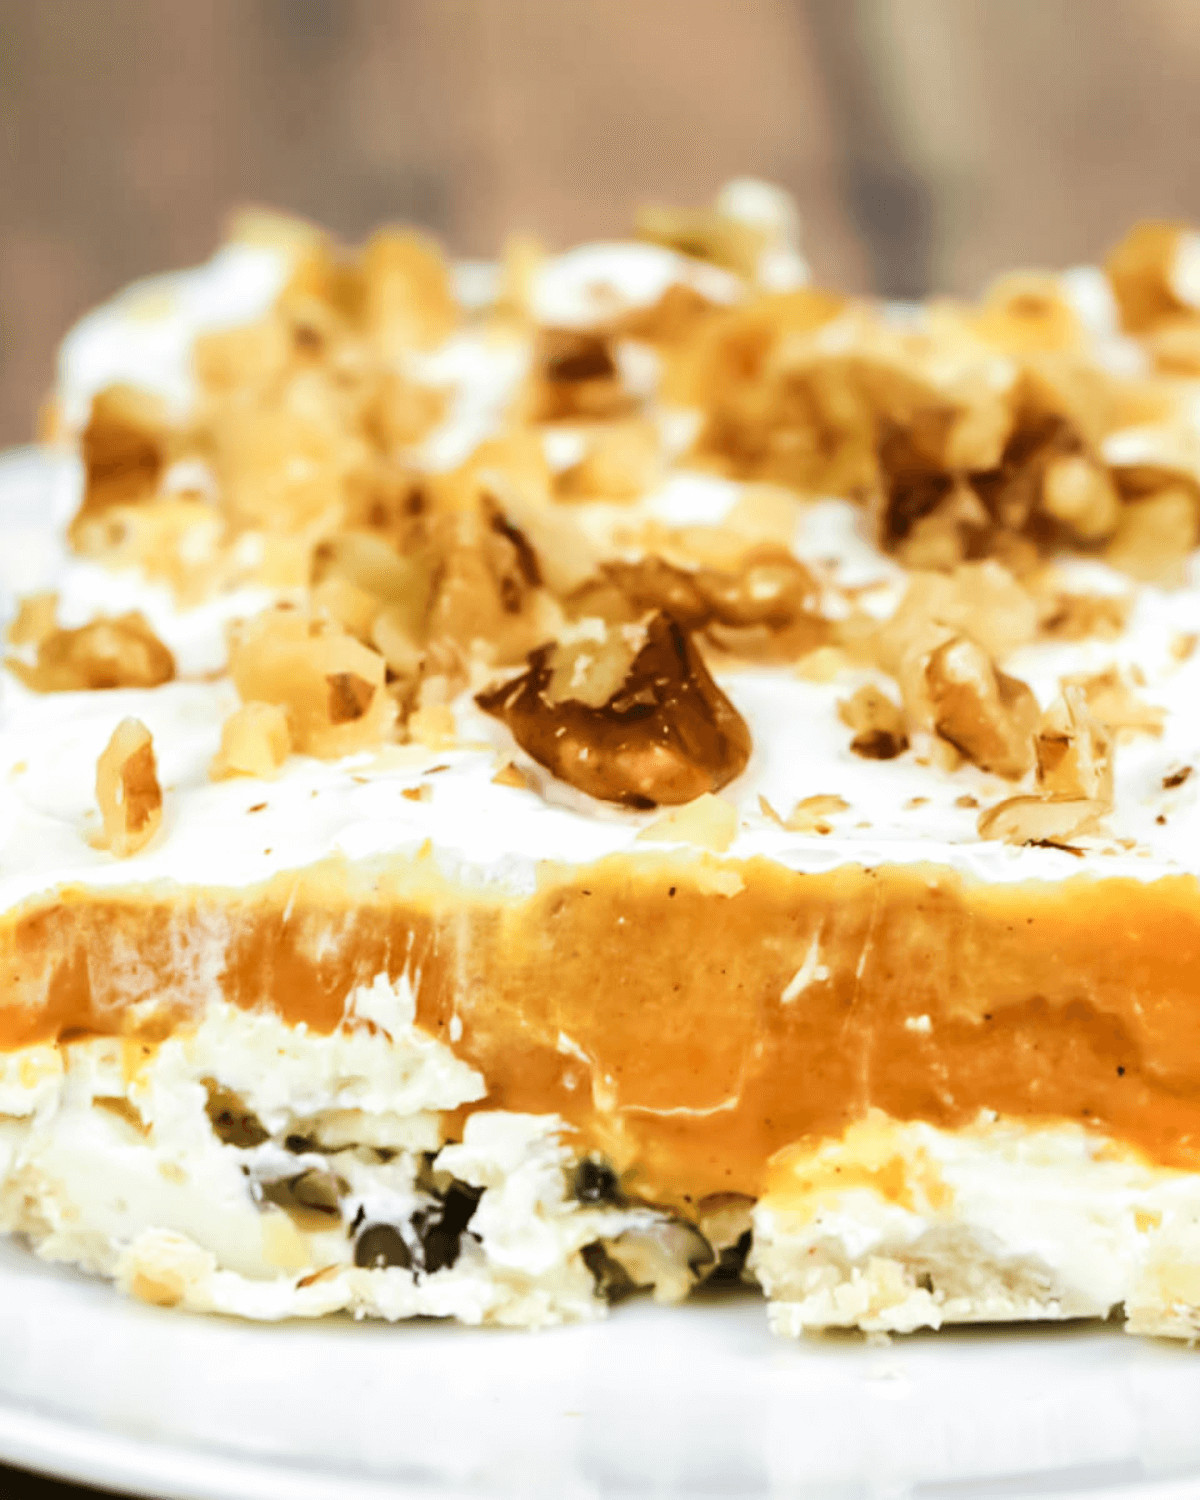 A slice of pumpkin lush on a white plate.